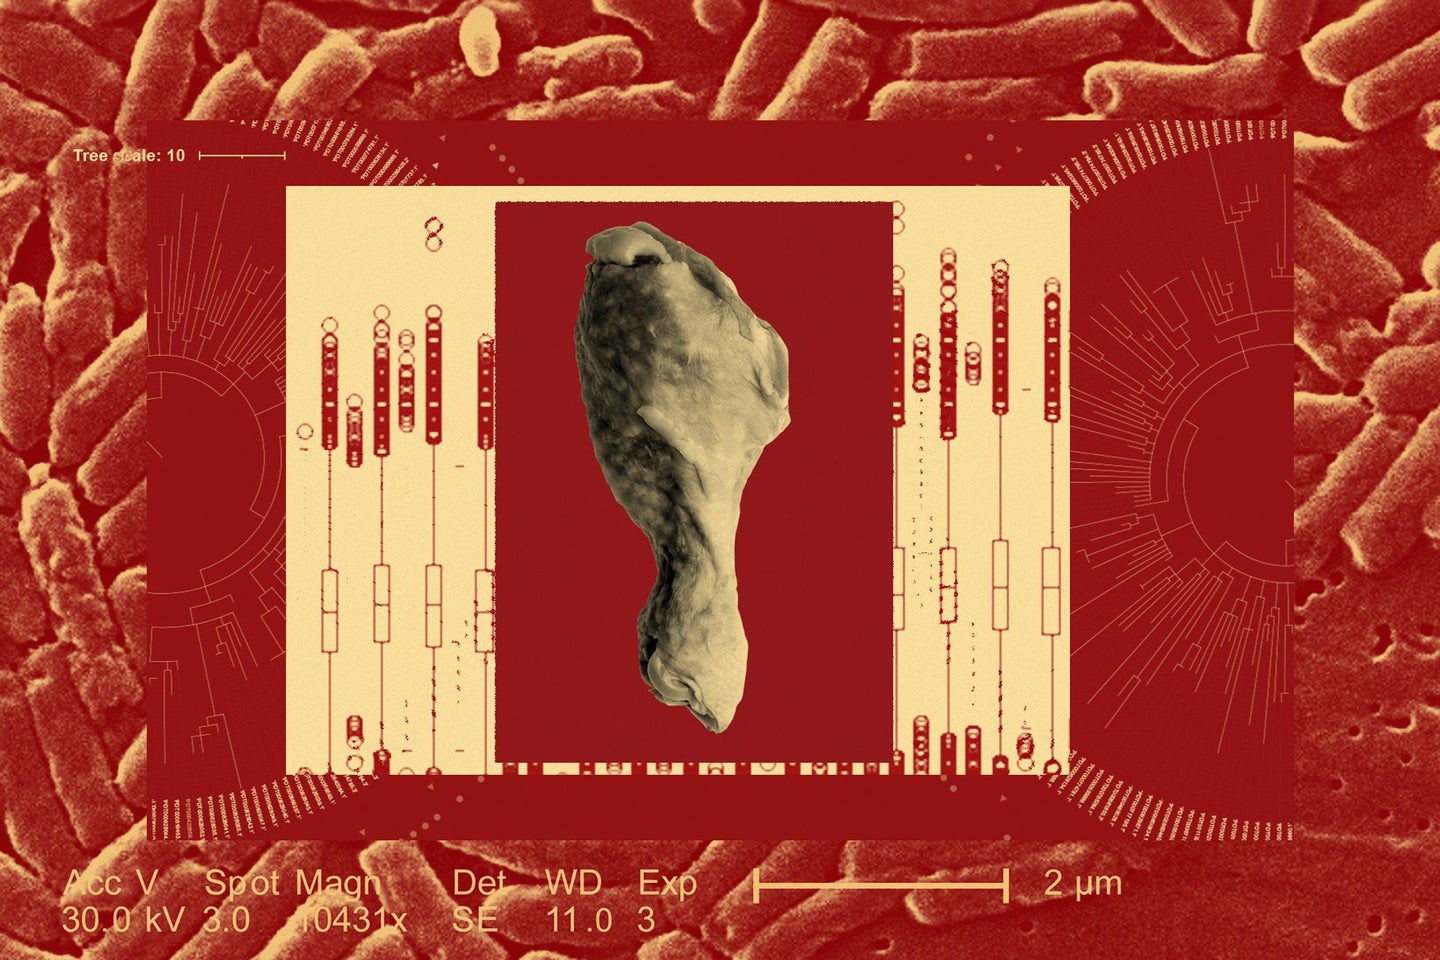 Chicken thigh on red background with graphs to represent salmonella outbreak investigation